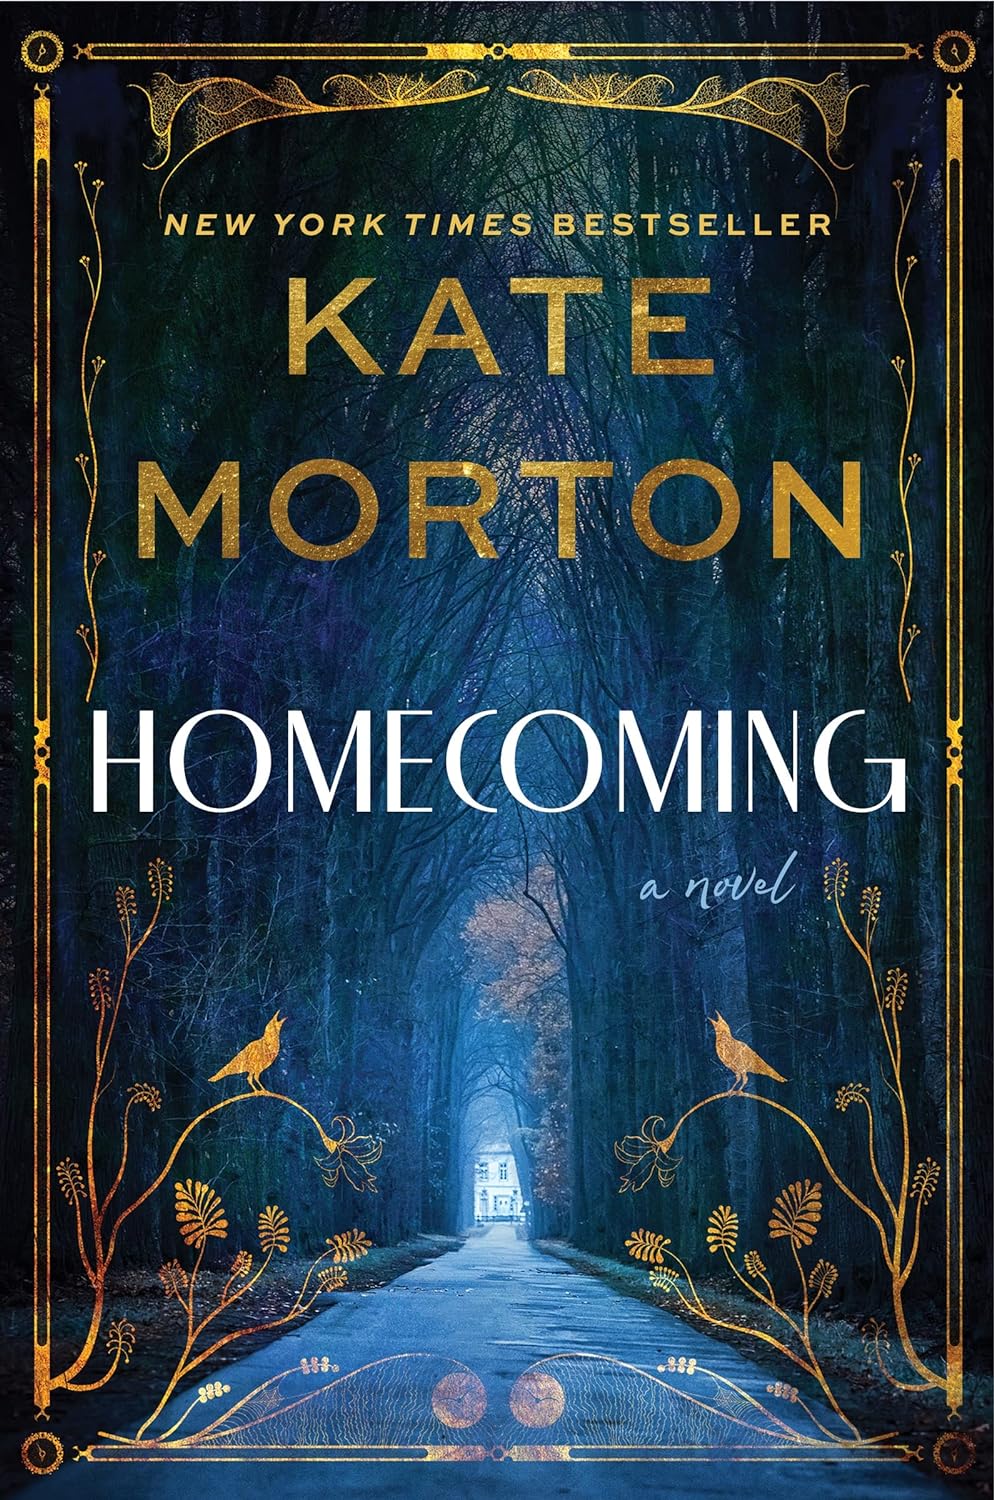 Cover of "Homecoming" by Kate Morton